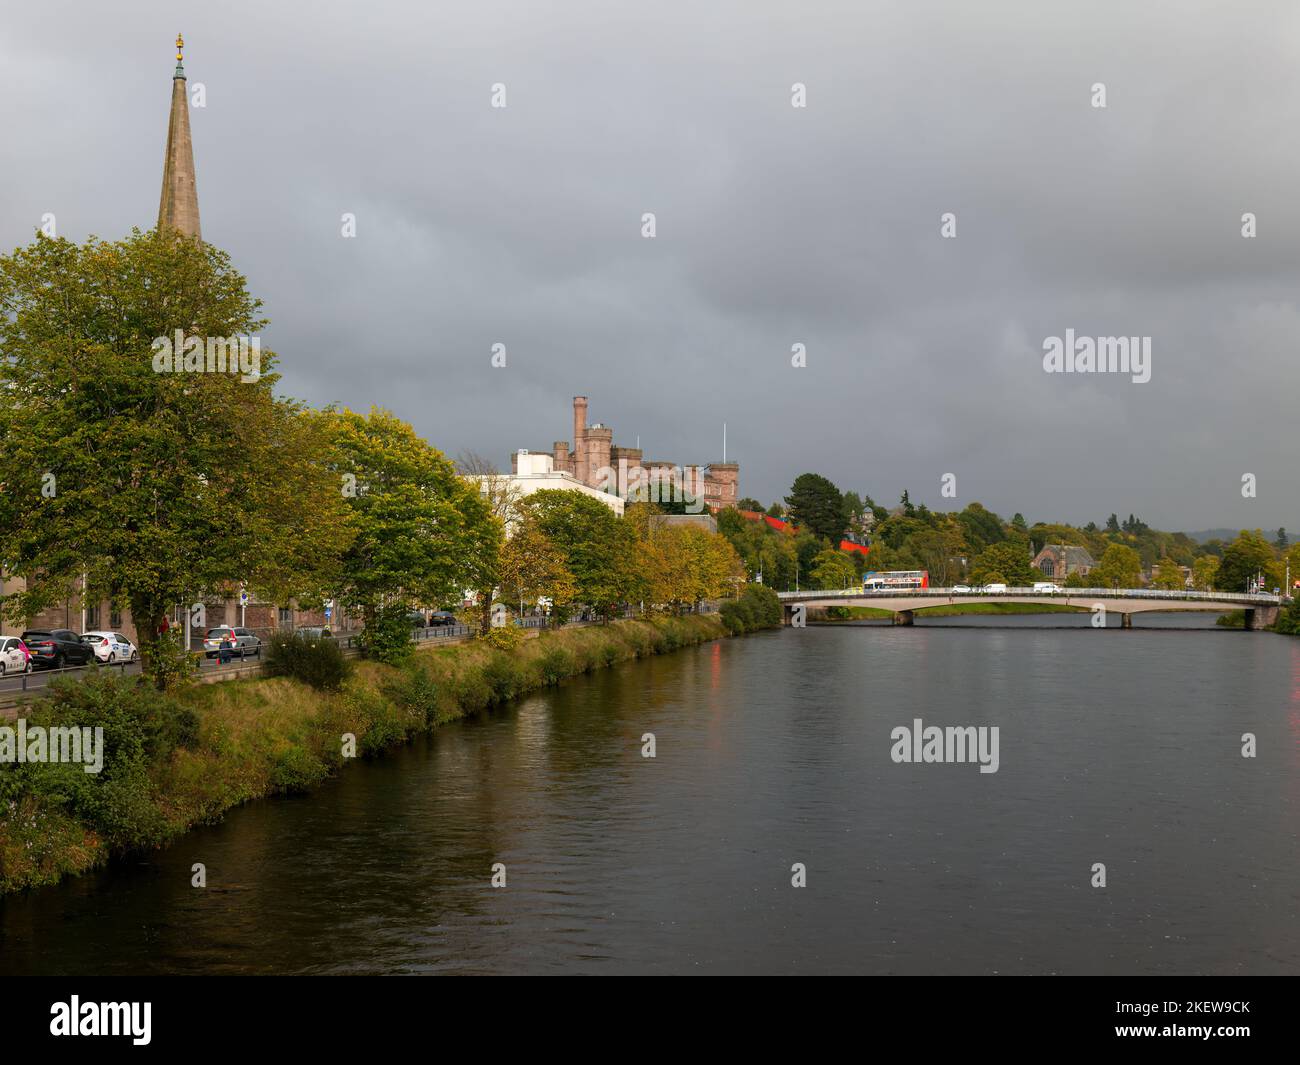 17 October 2022. Inverness,Highlands and Islands,Scotland. This is a scene around the River Ness in the City Centre showing the Castle, Restaurants an Stock Photo